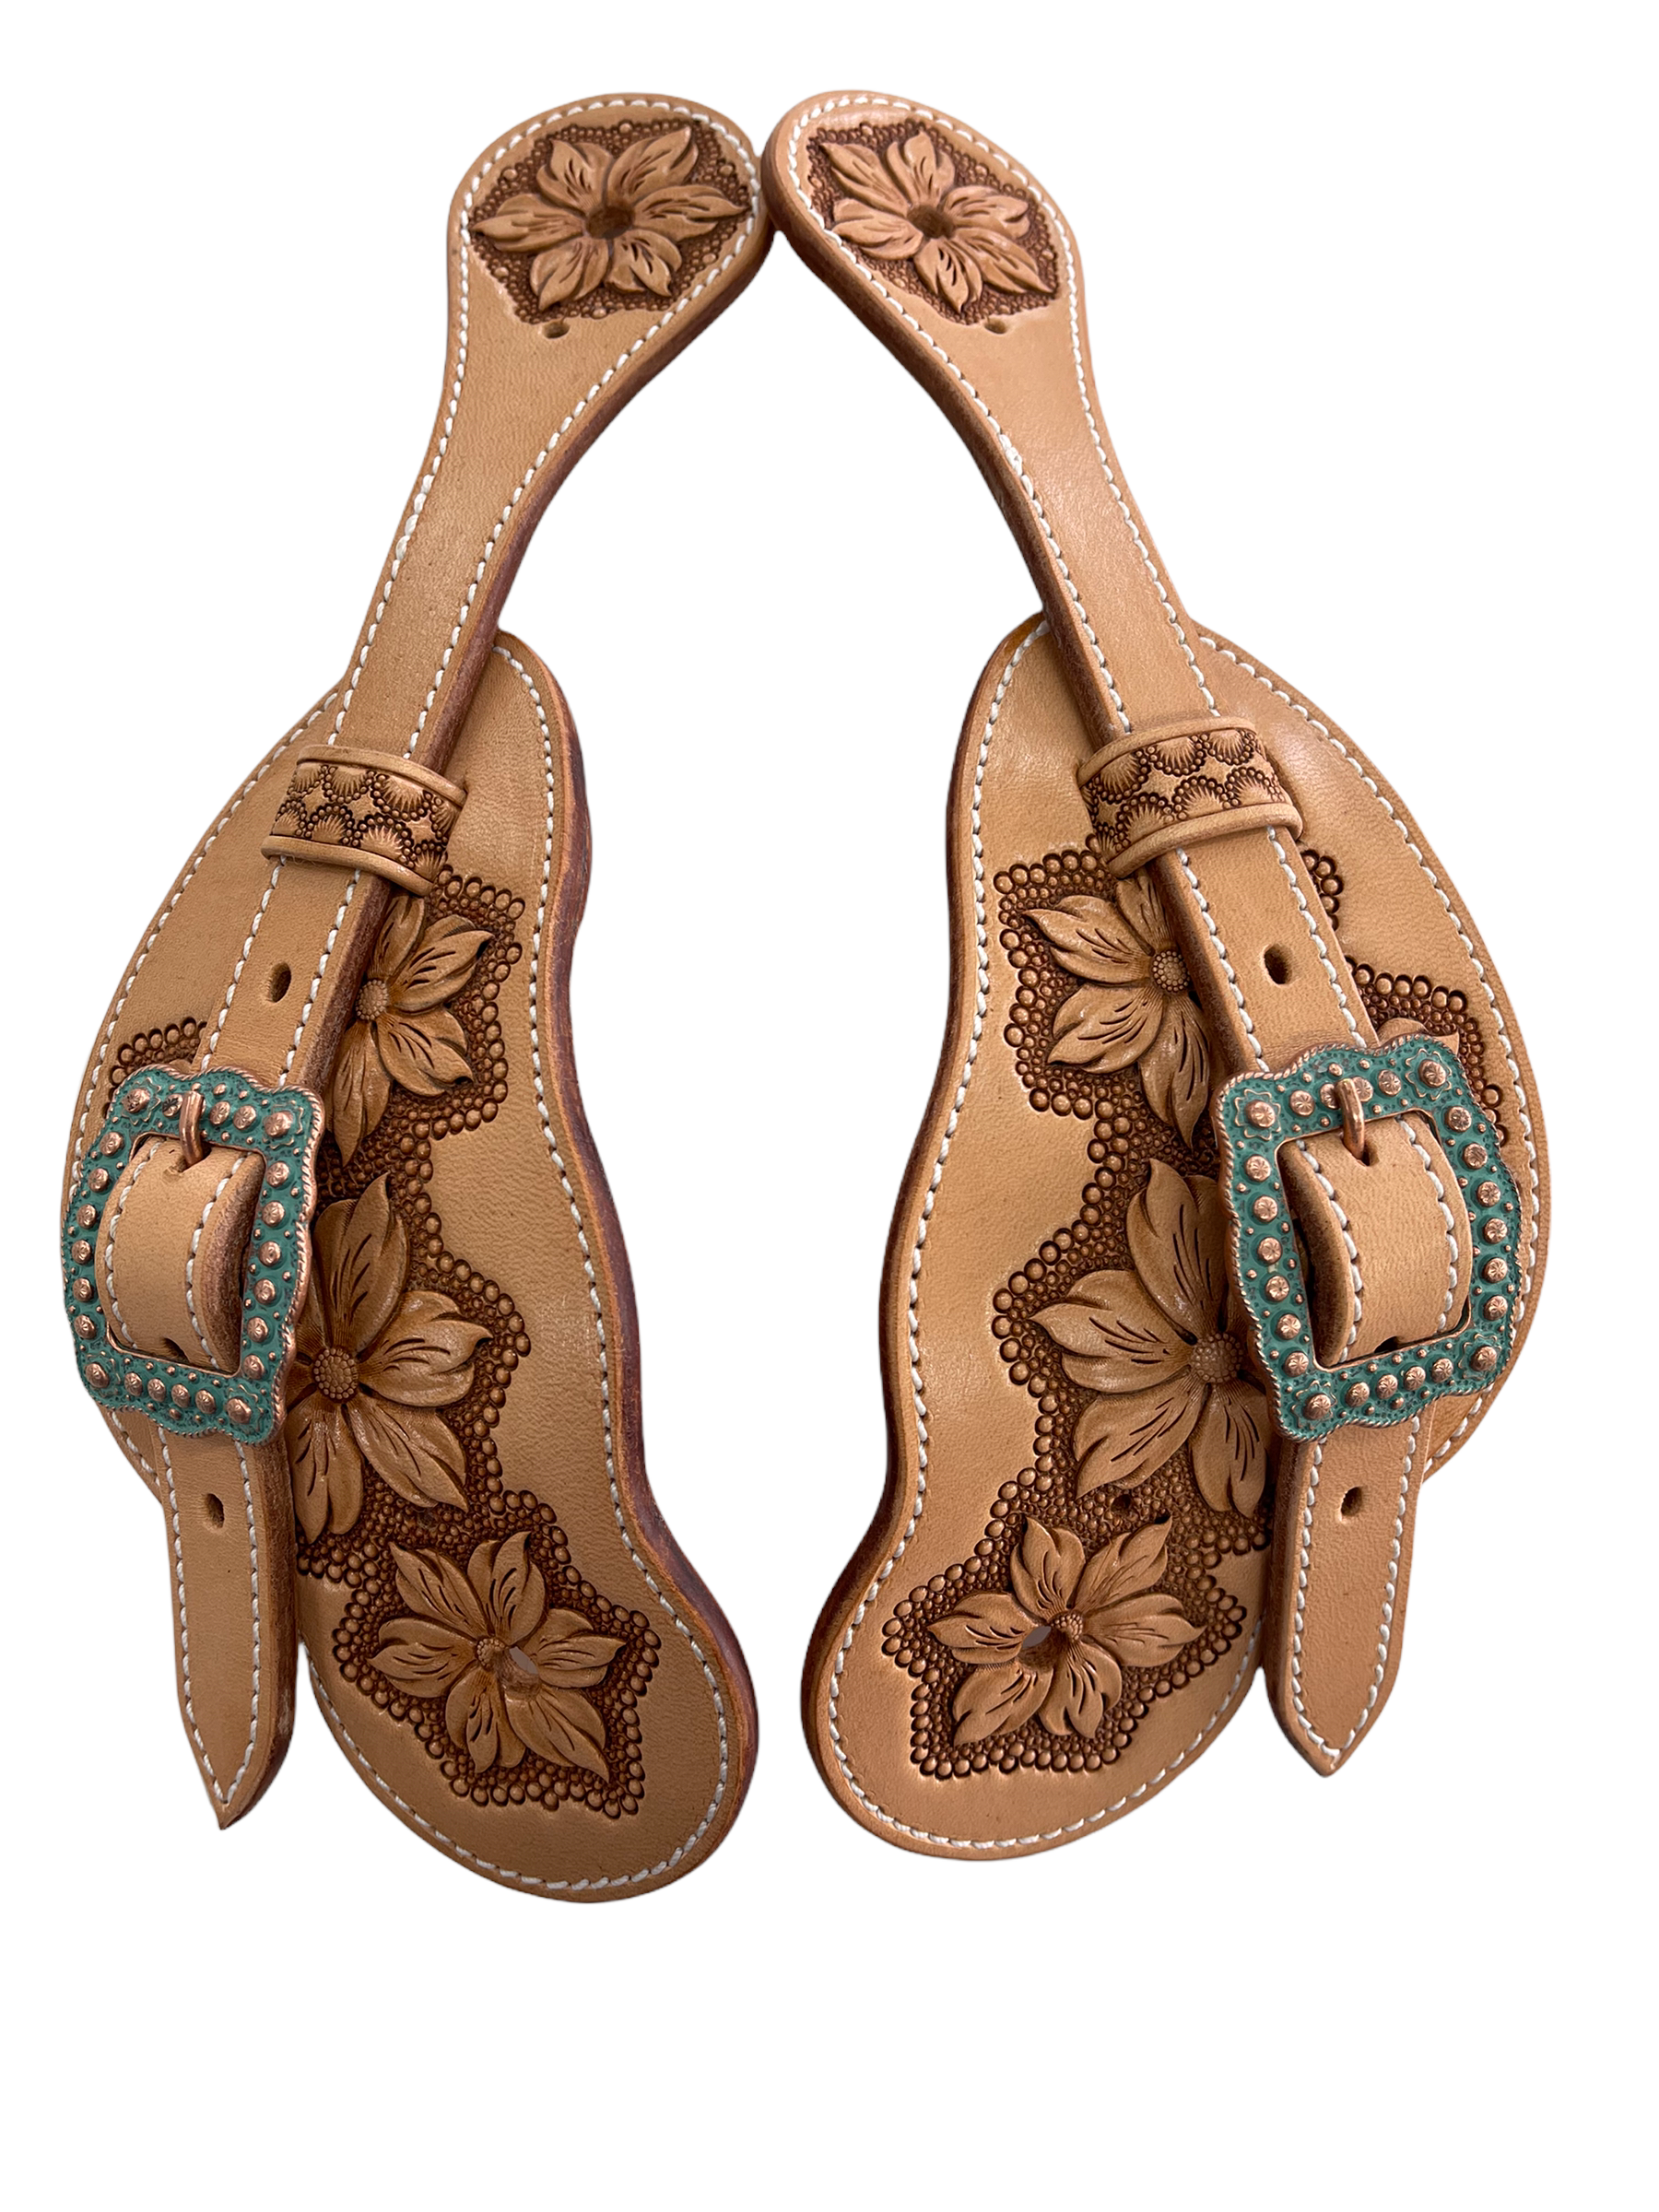 Buckaroo Style Floral Carved Spur Straps #5